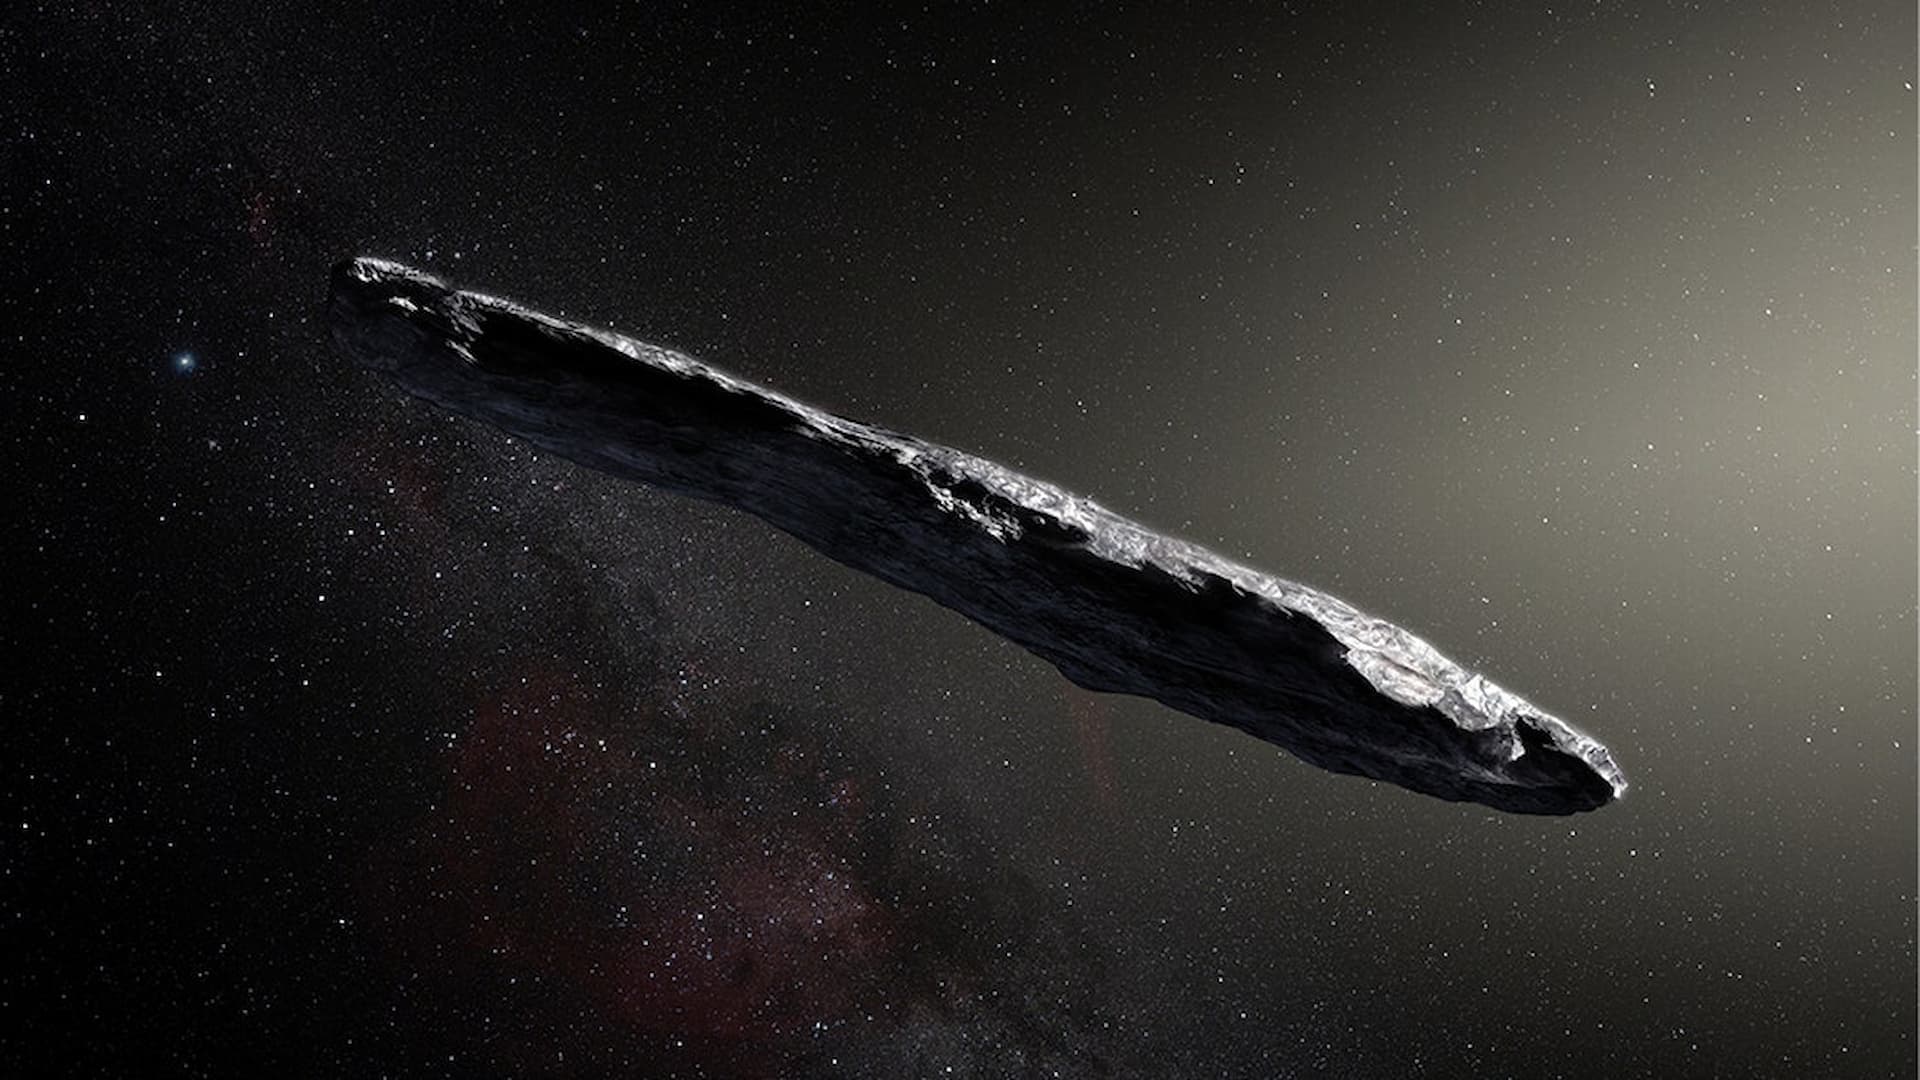 MORE ASI “The Galileo Project: In Search for Technological Interstellar Objects”